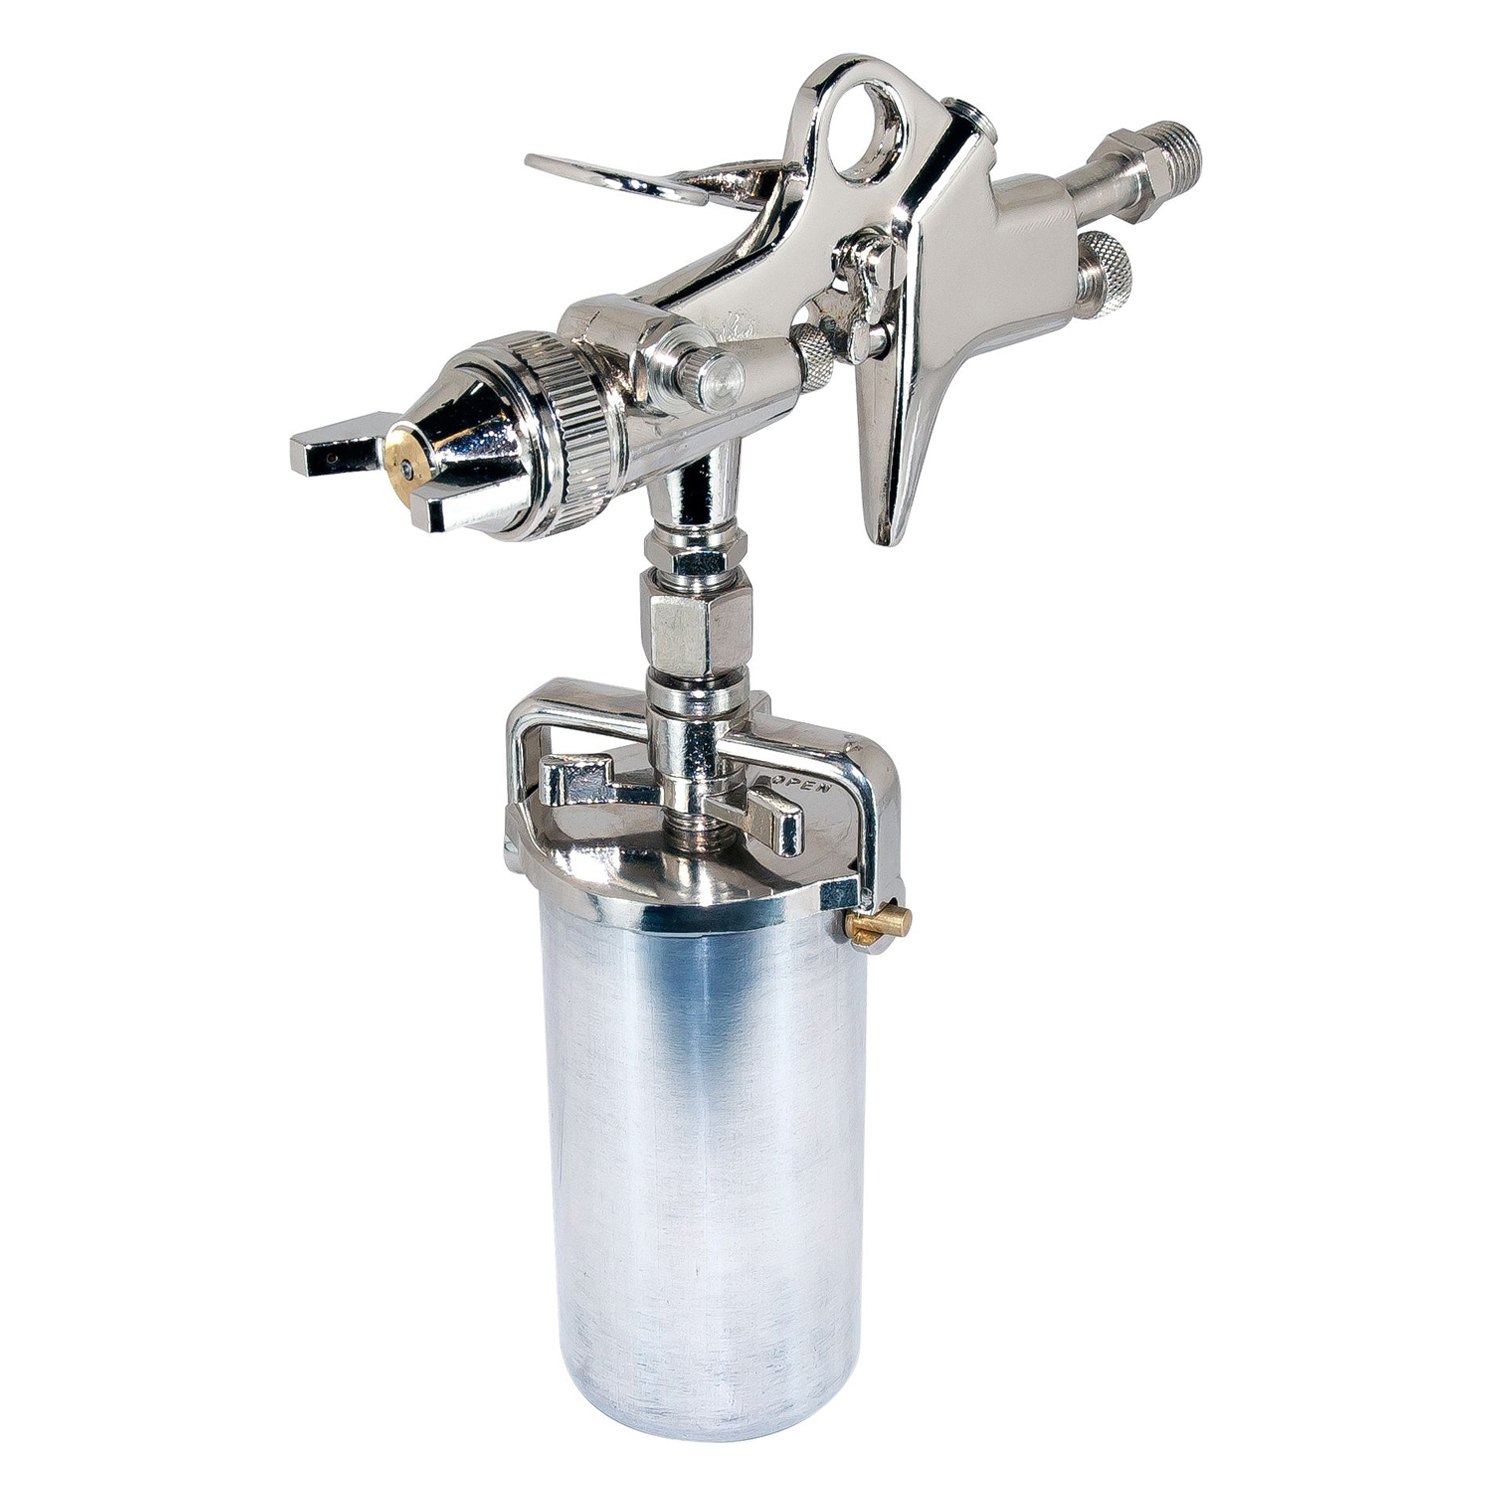 AES Cup mm Gun Industries® HVLP Spray Feed 128 Touch-Up - with Siphon 1.6